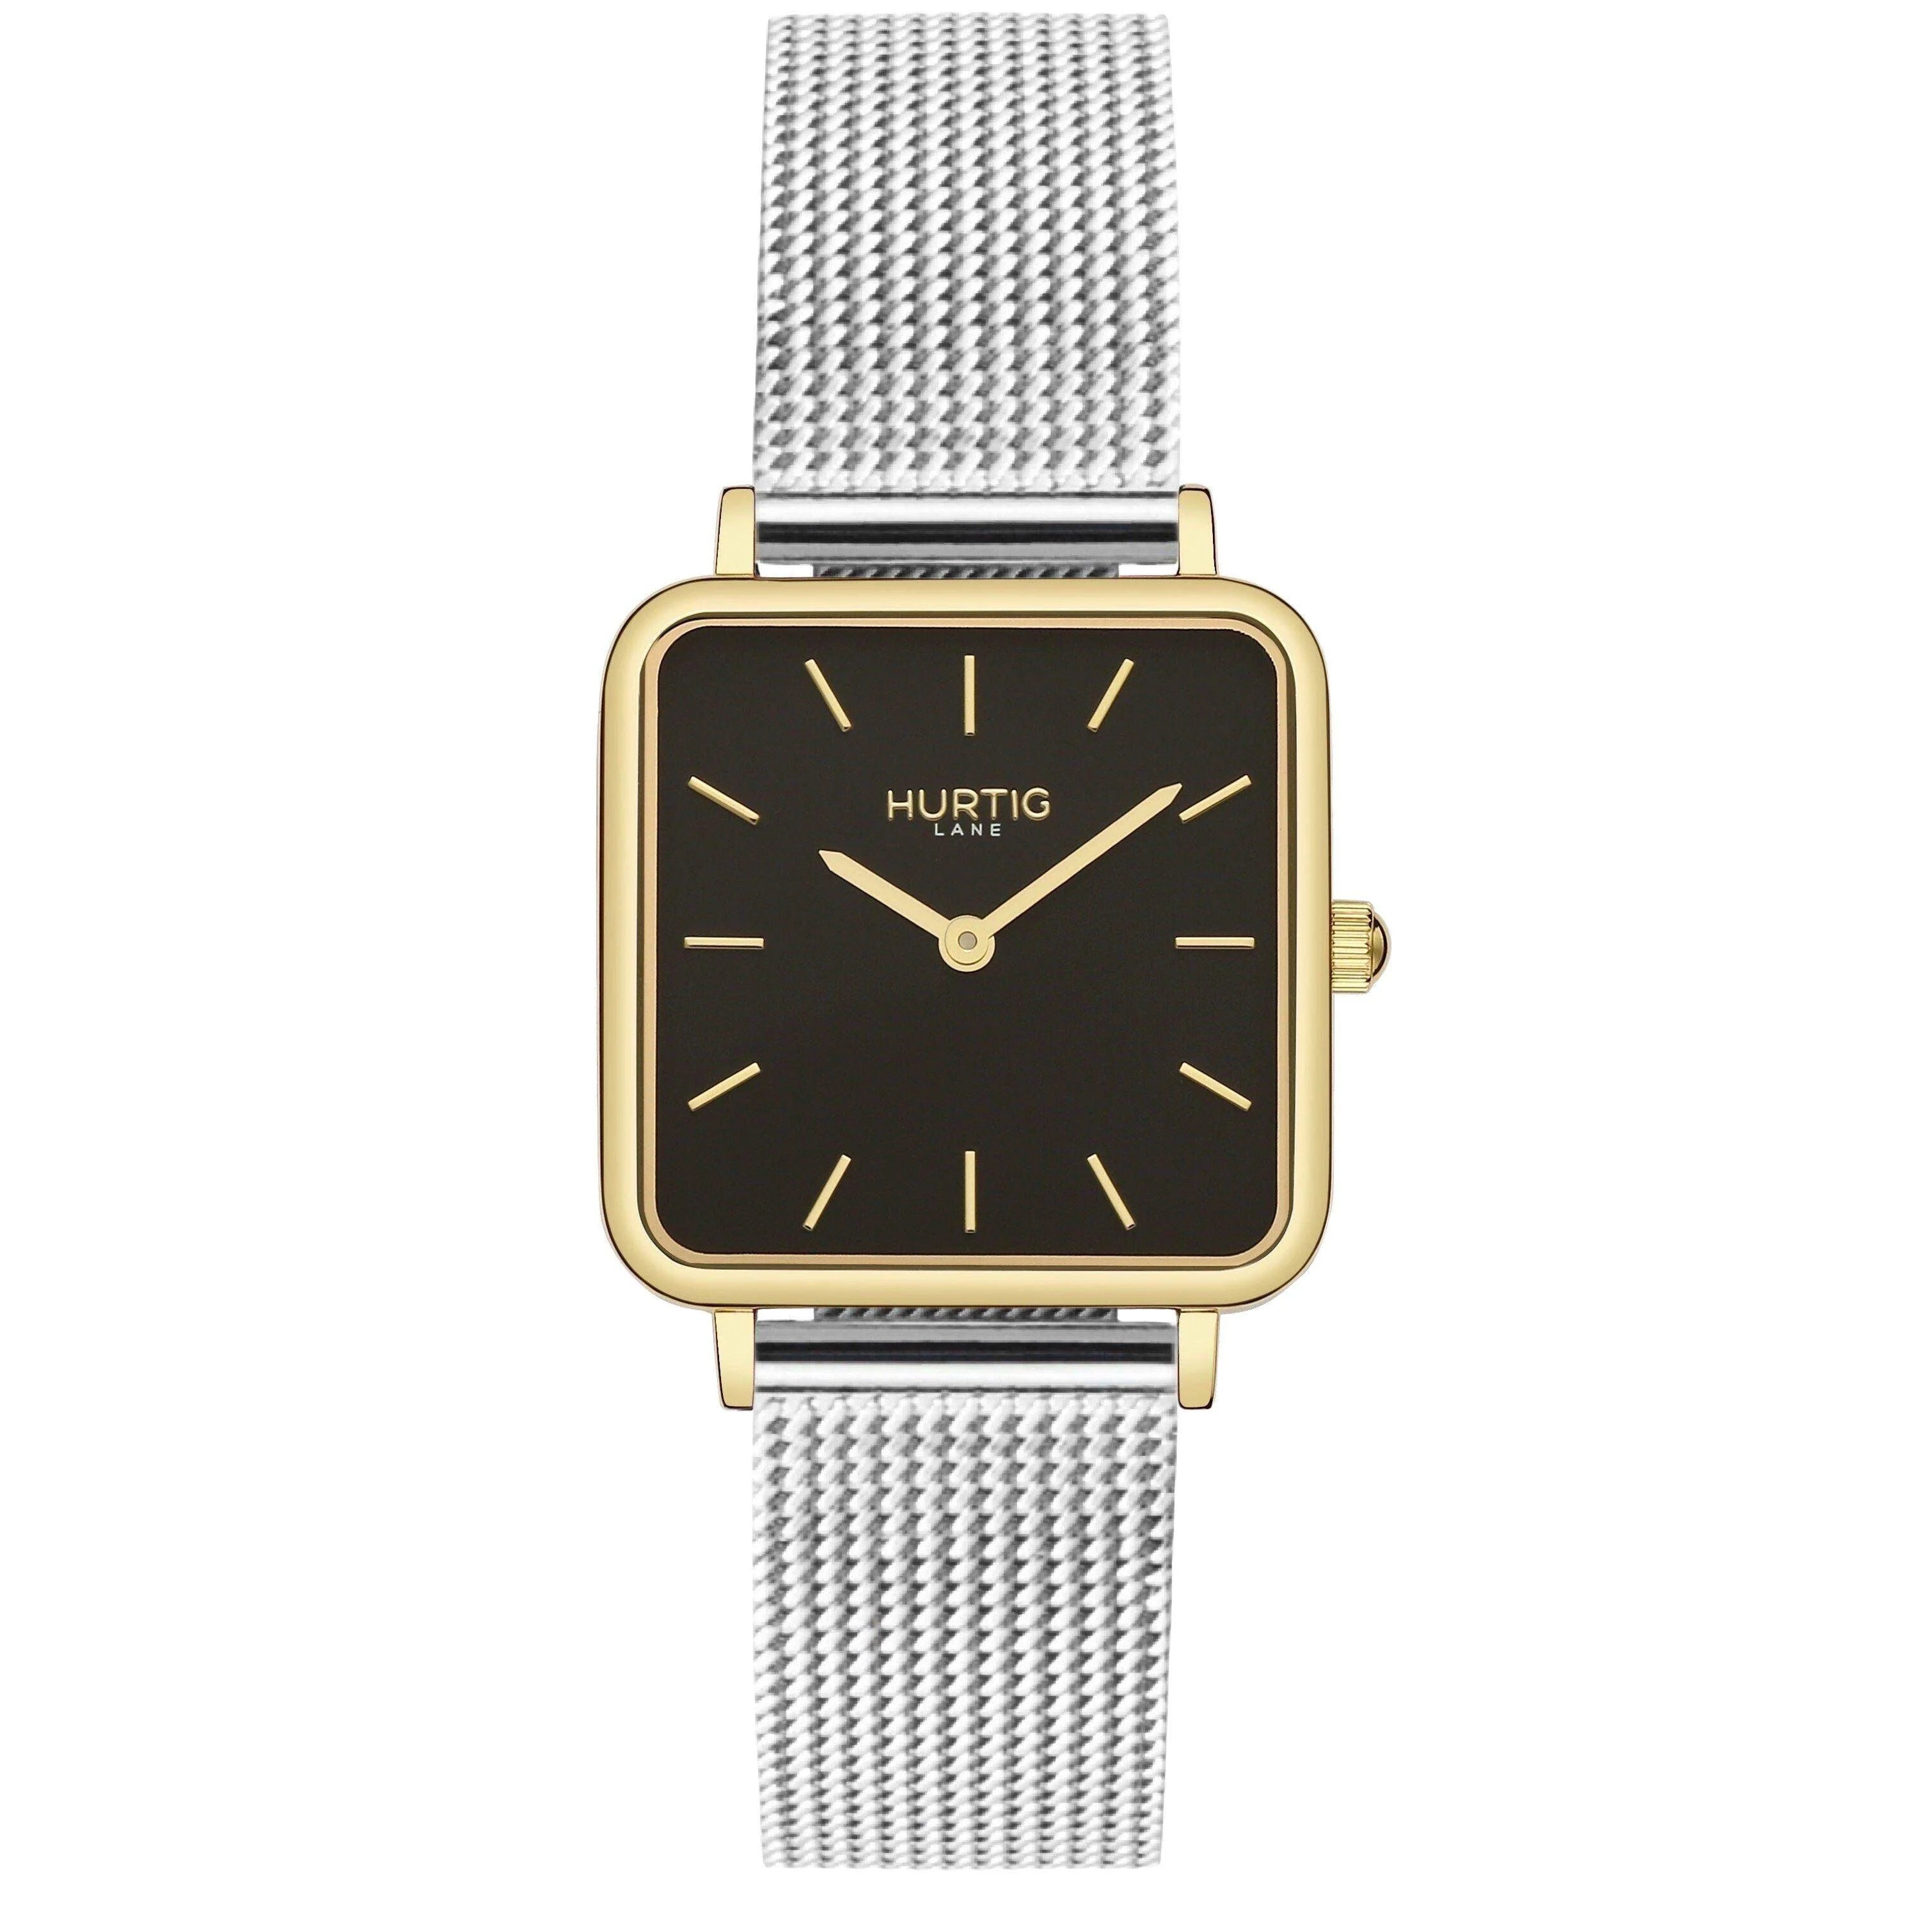 Neliö Square Stainless Steel Watch Gold, Black & Silver